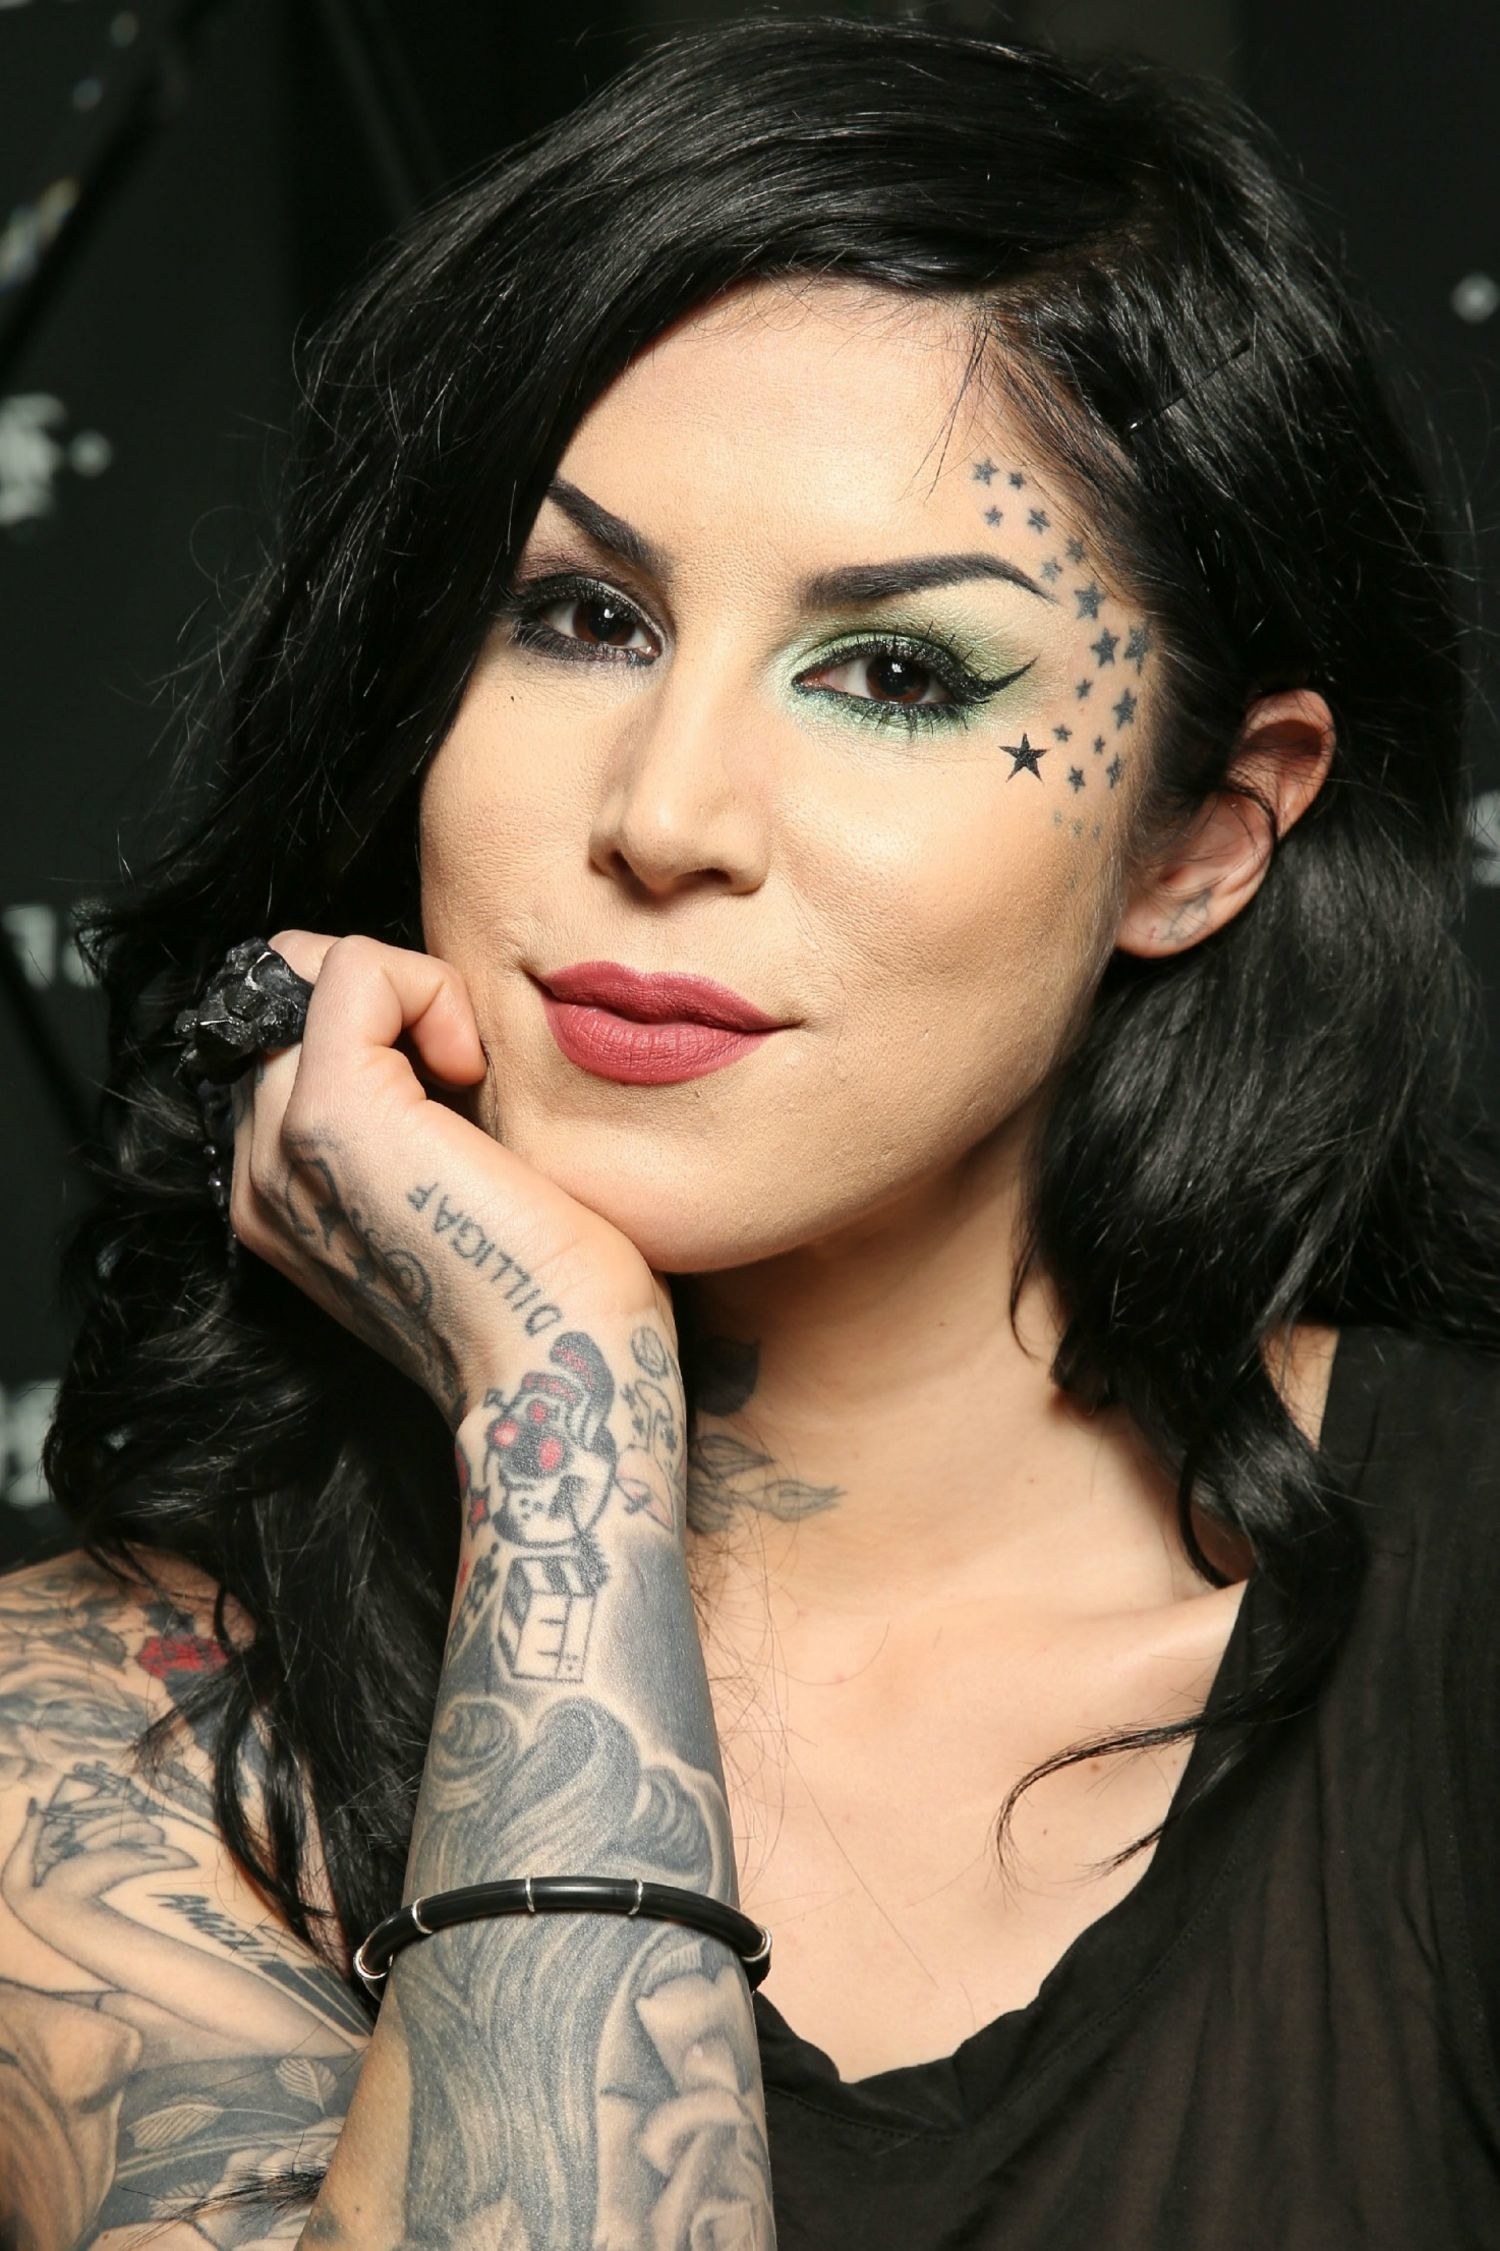 Kat Von D Wallpapers High Quality | Download Free